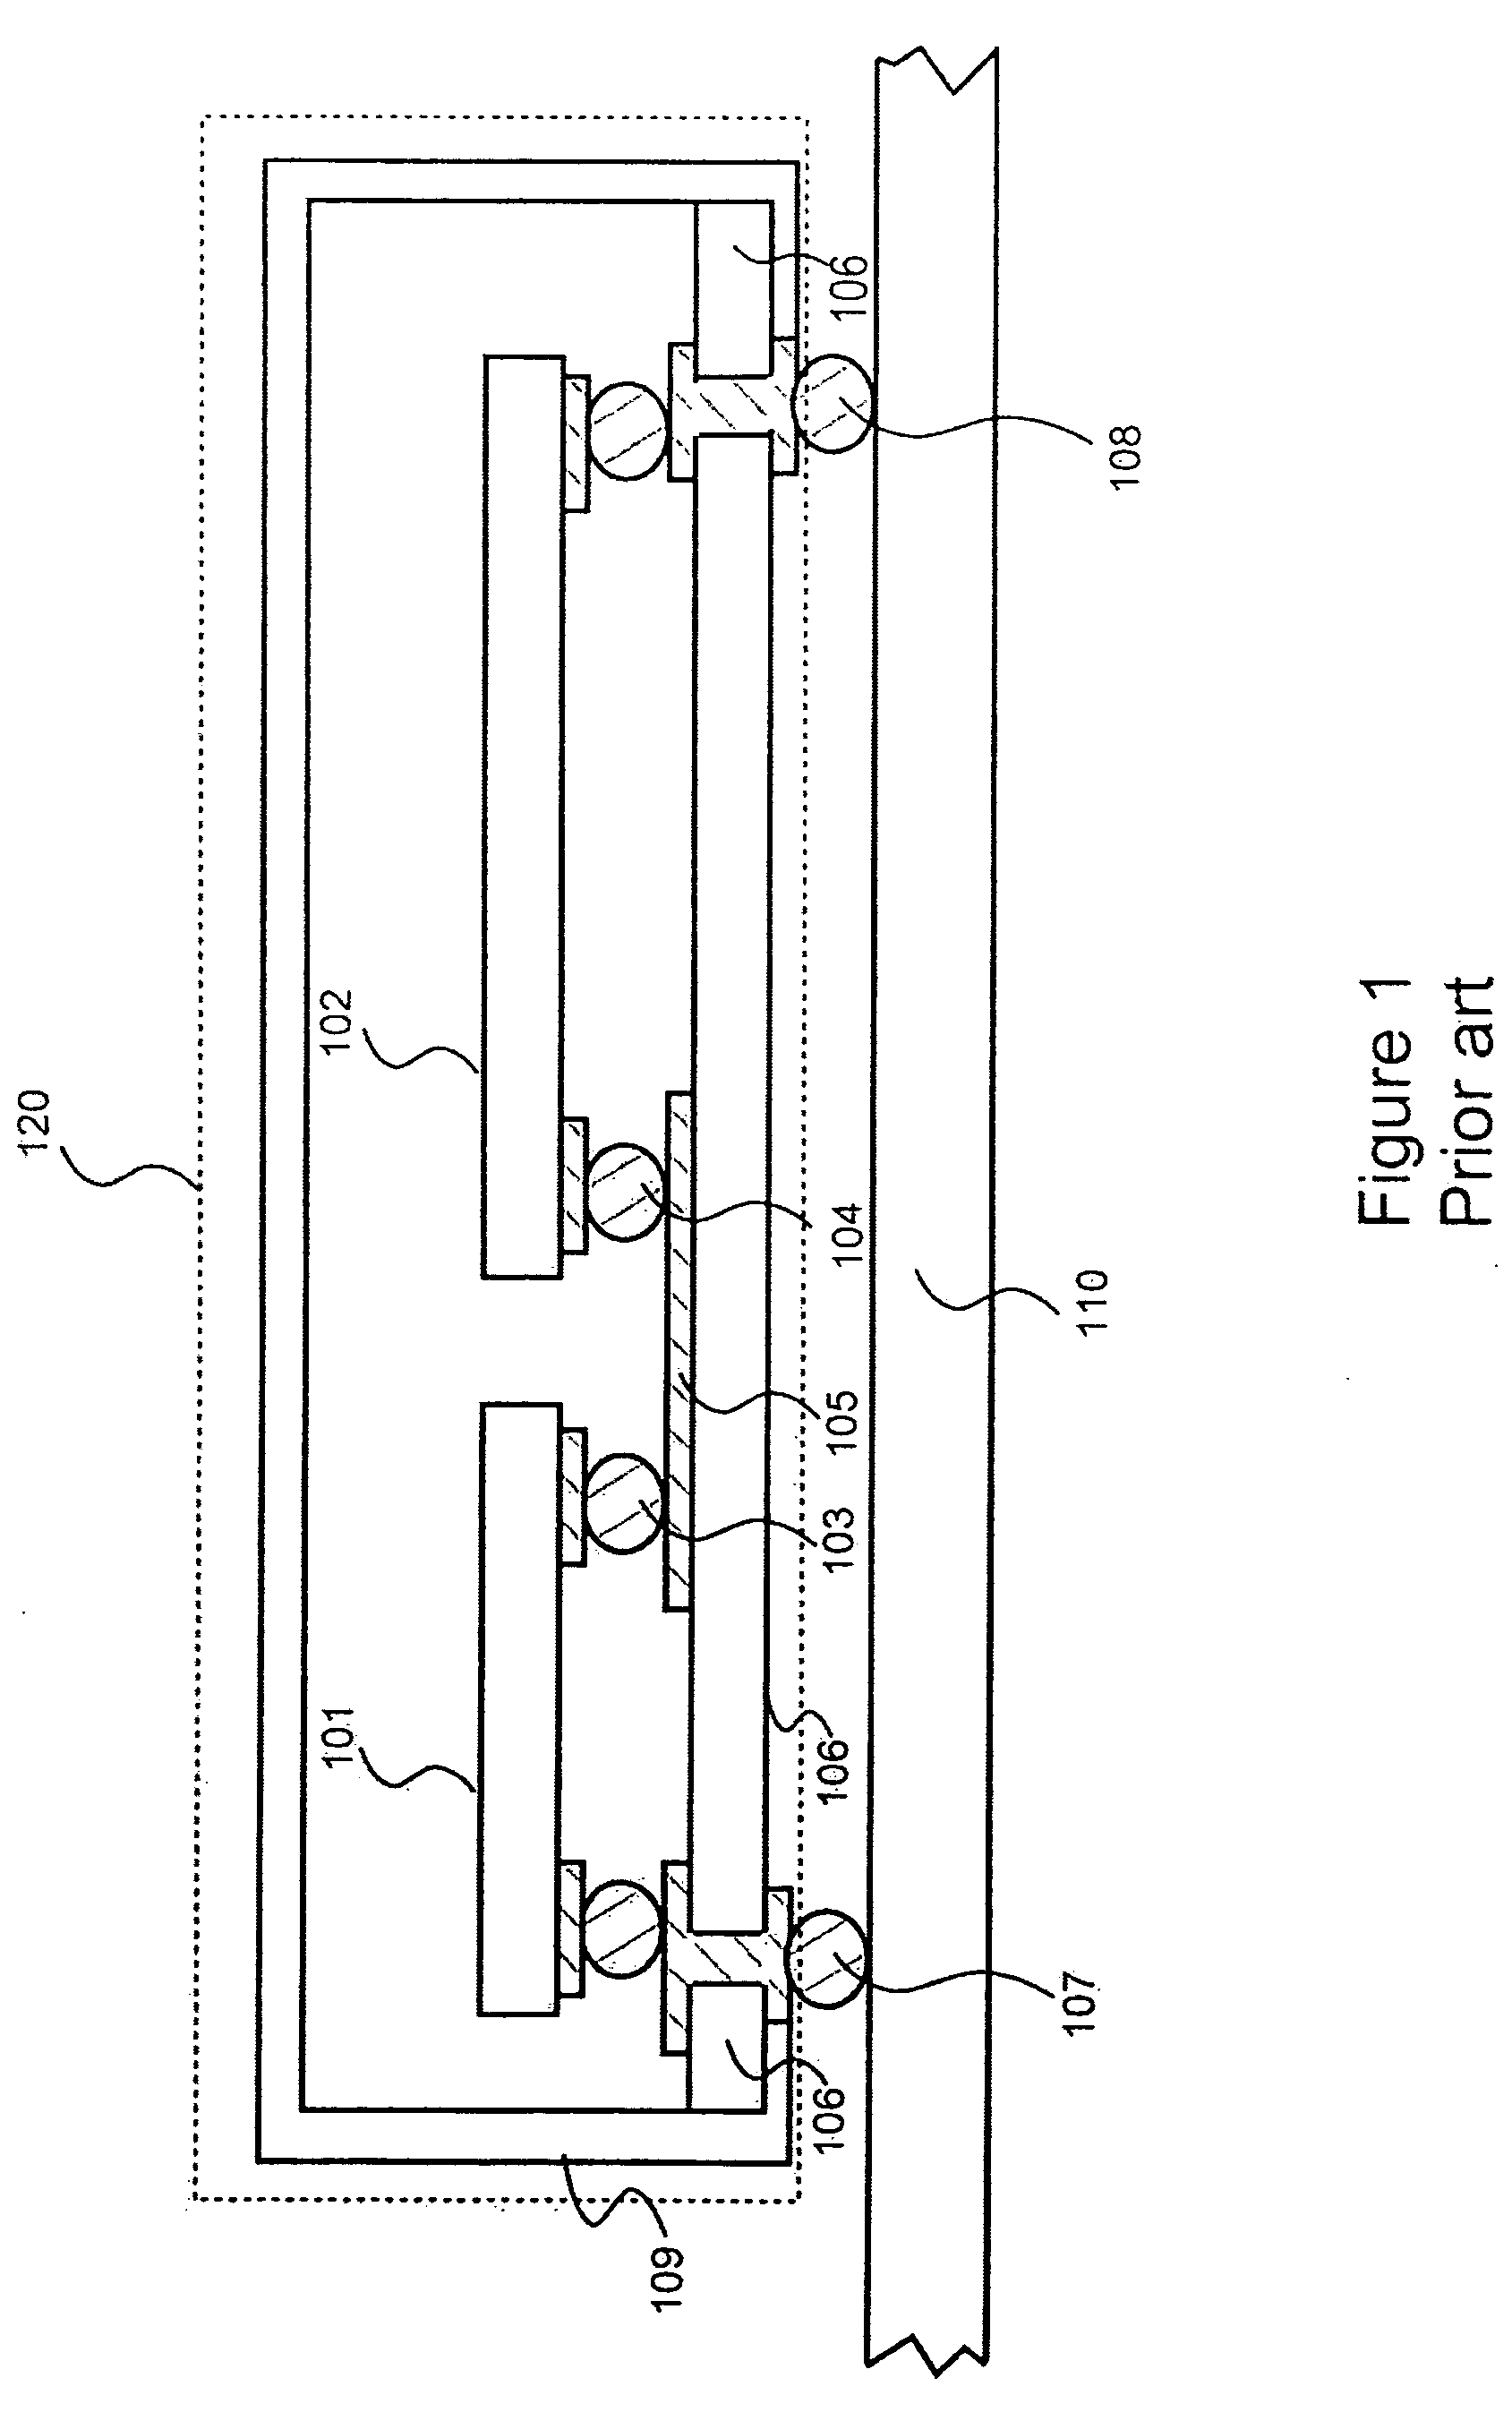 Low-loss microstrip transmission line structure and a method for its implementation